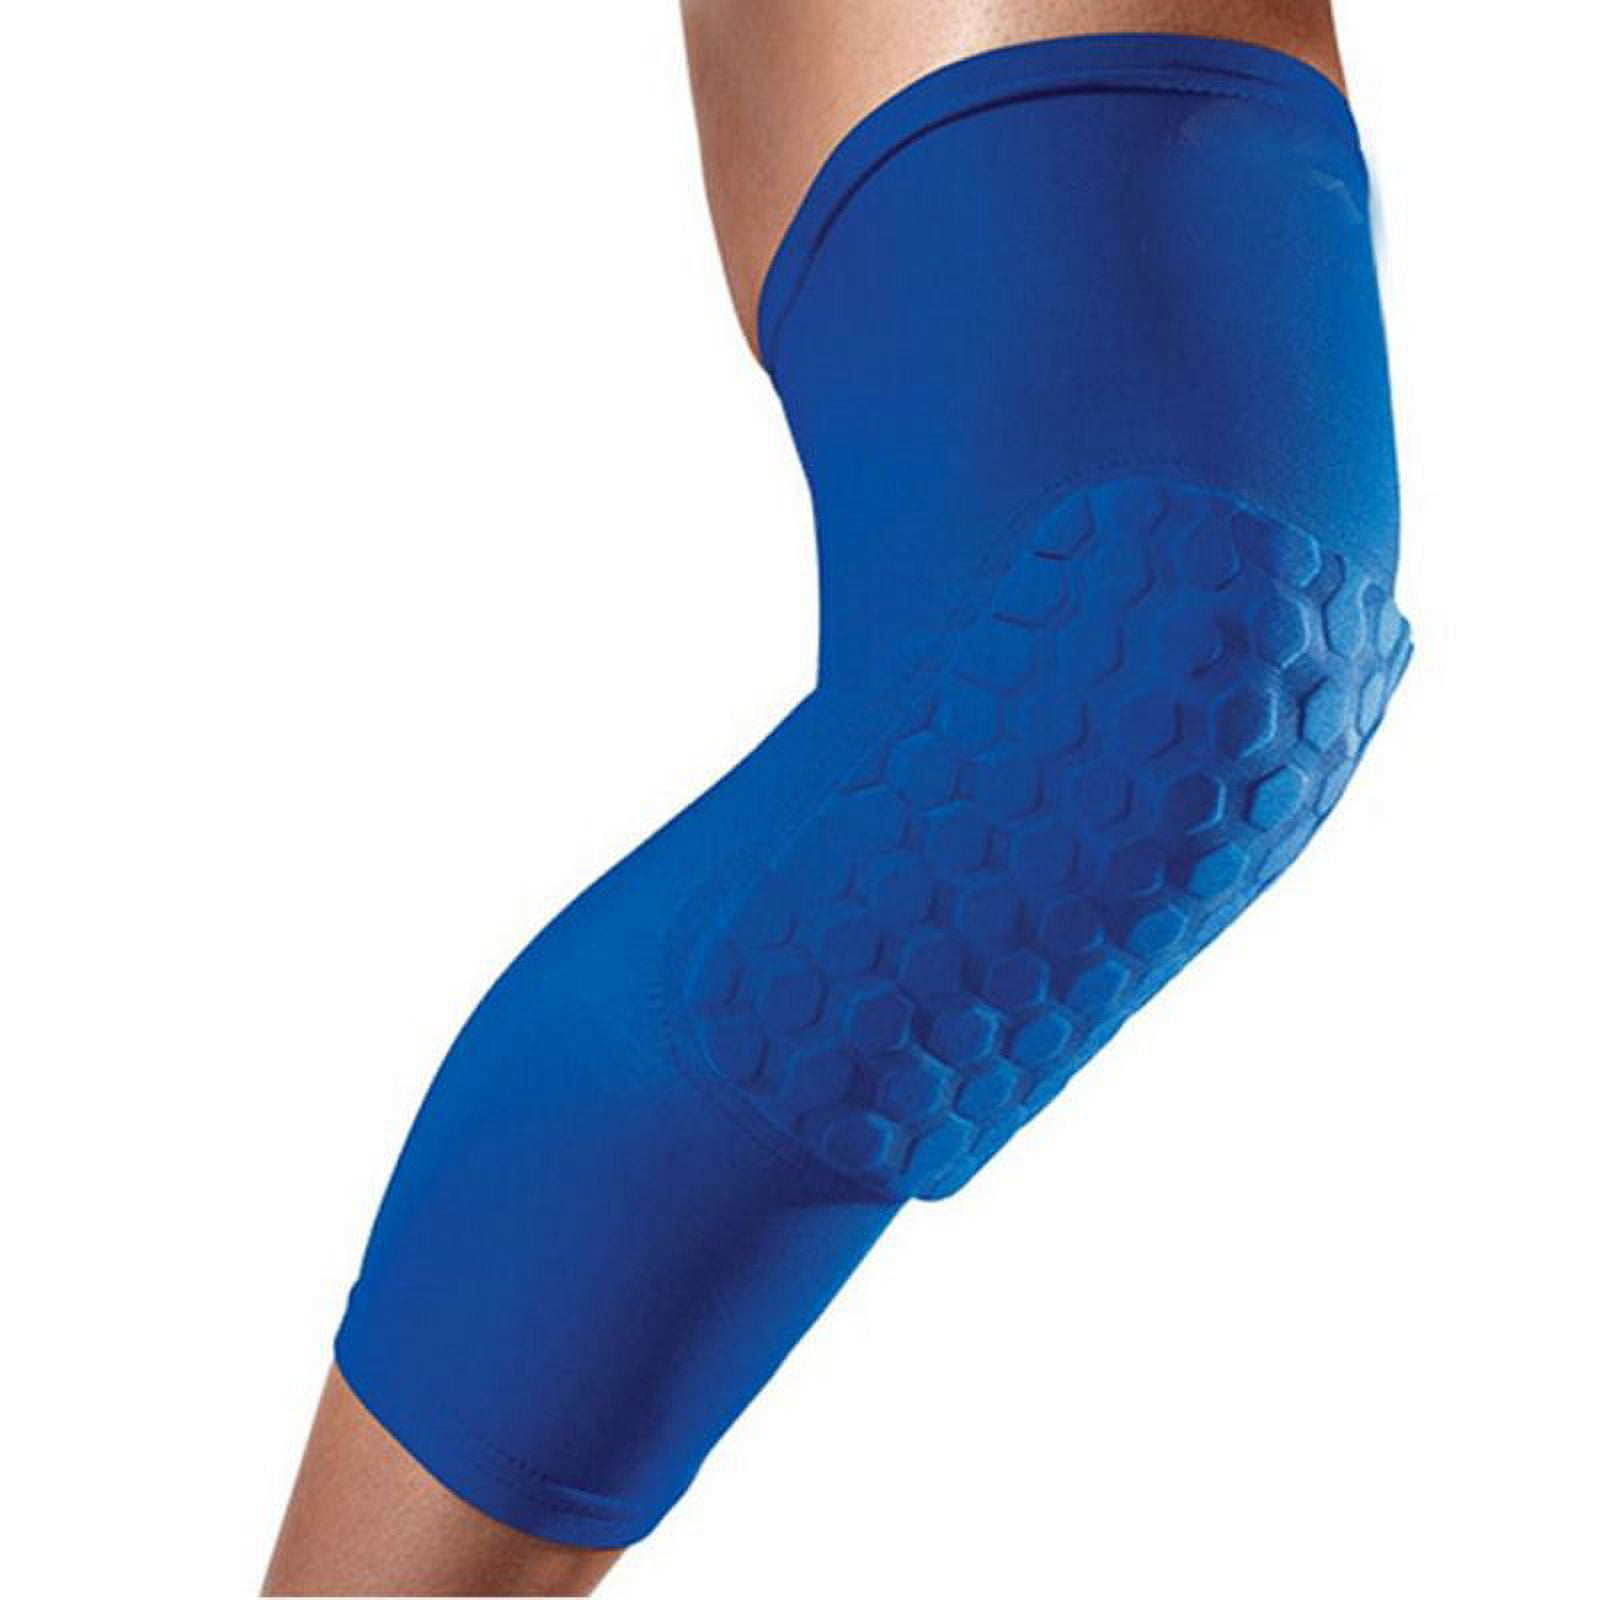 Kids Compression Leg Sleeves -Slip Leg Sleeves with Protective Knee Pads  for Basketball Volleyball Skating